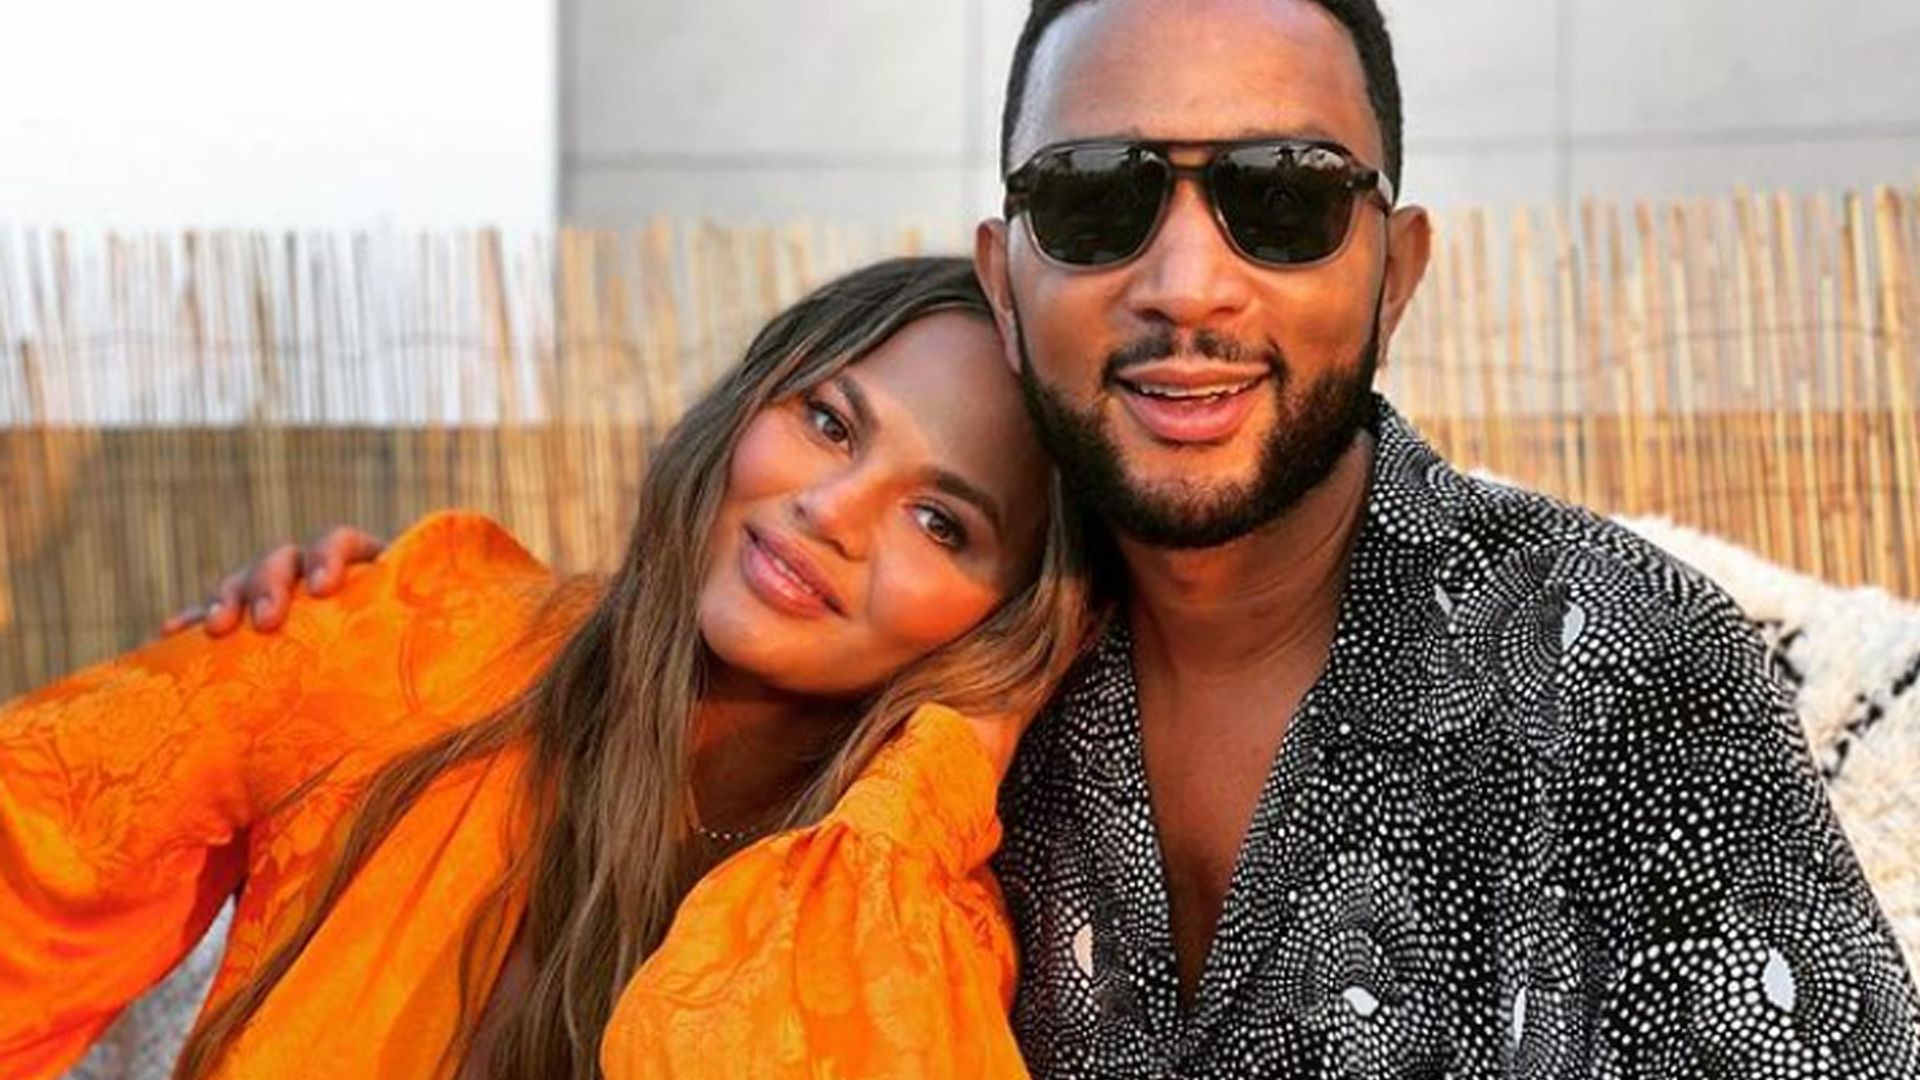 Chrissy Teigen and John Legend surprise fans by welcoming new addition to the family